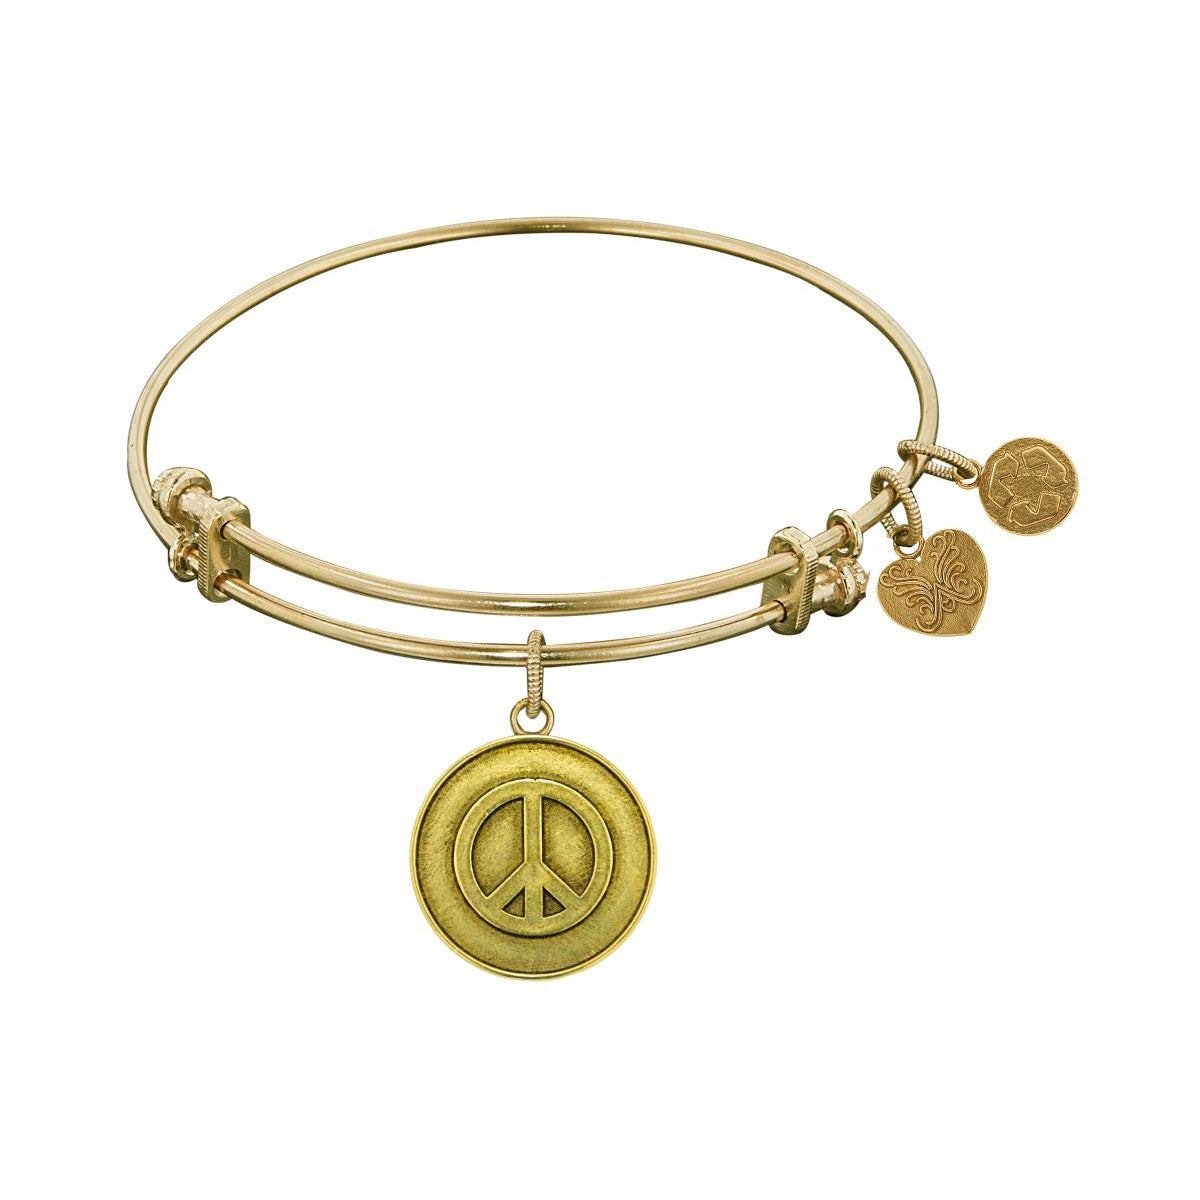 Smooth Finish Brass Peace Symbol Angelica Bangle Bracelet, 7.25" fine designer jewelry for men and women